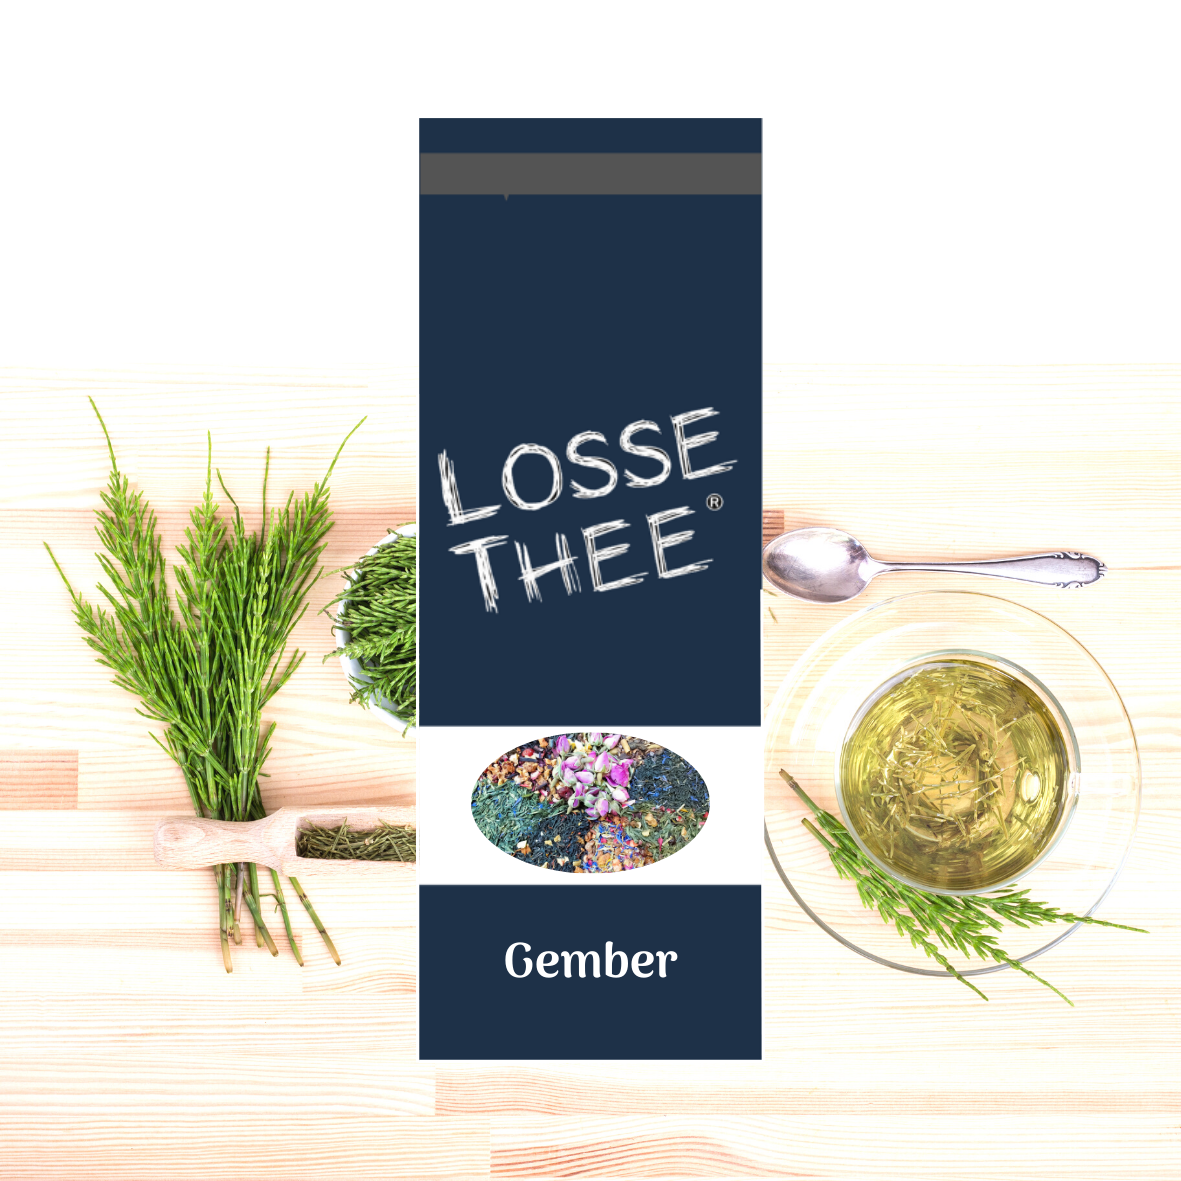 LOSSE THEE Gember